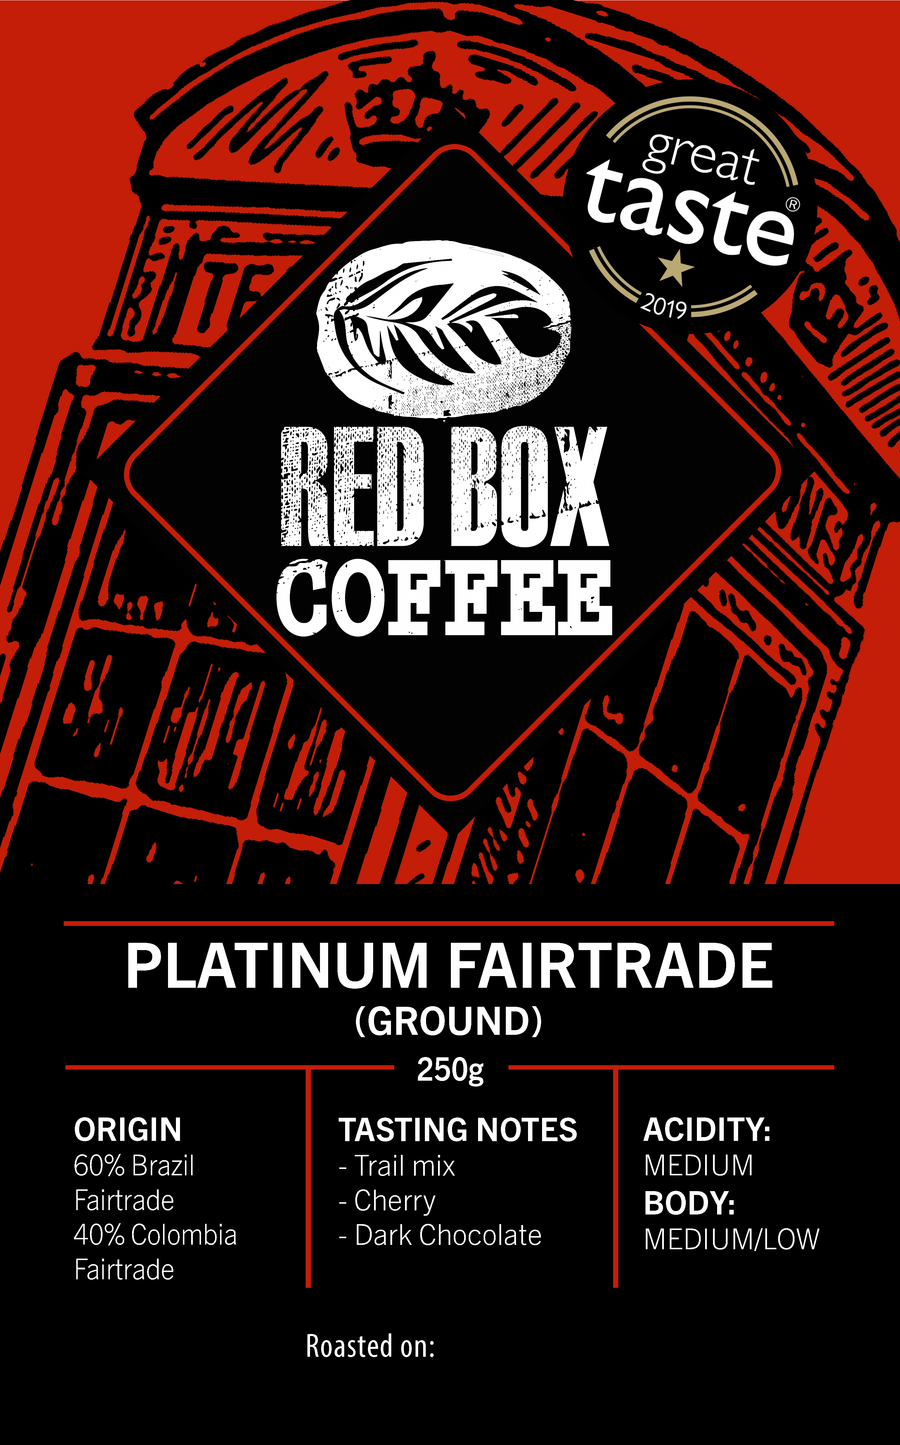 Red Box Platinum Fairtrade Coffee, Great Taste 1-Star 2019 - GROUND FOR FRENCH PRESS